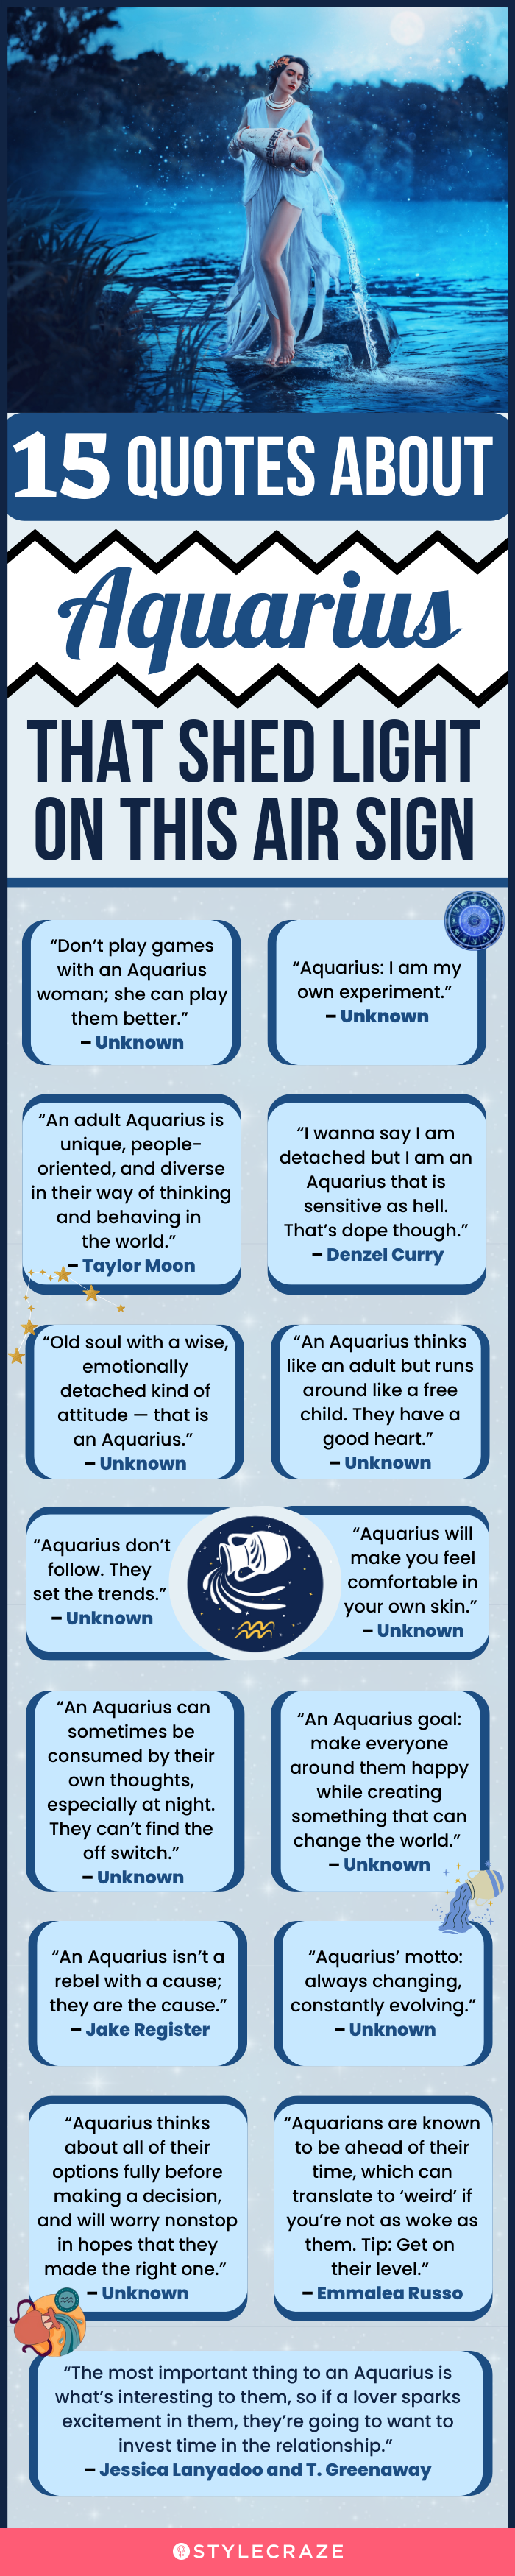 15 quotes about aquarius that shed light on this air sign (infographic)